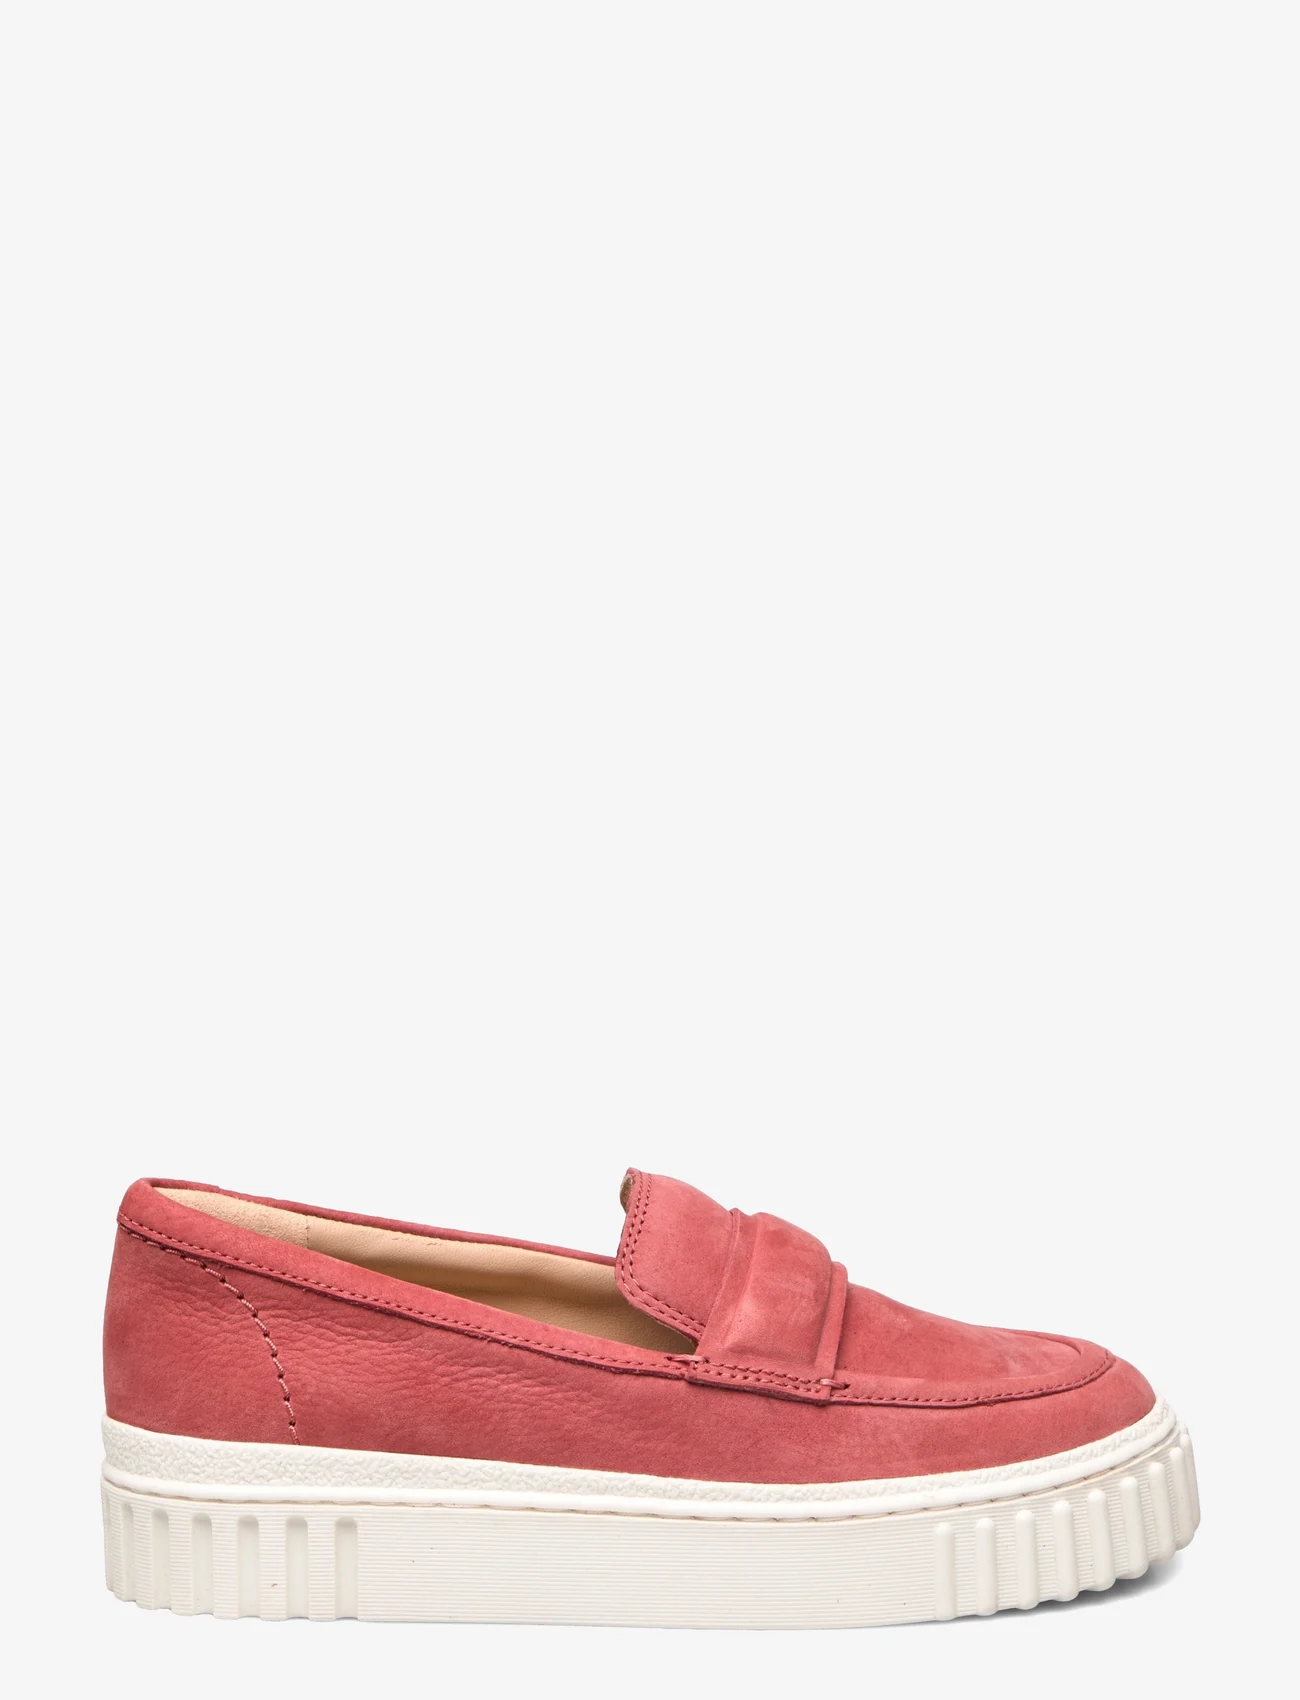 Clarks - Mayhill Cove D - gimtadienio dovanos - 4335 dusty rose nbk - 1